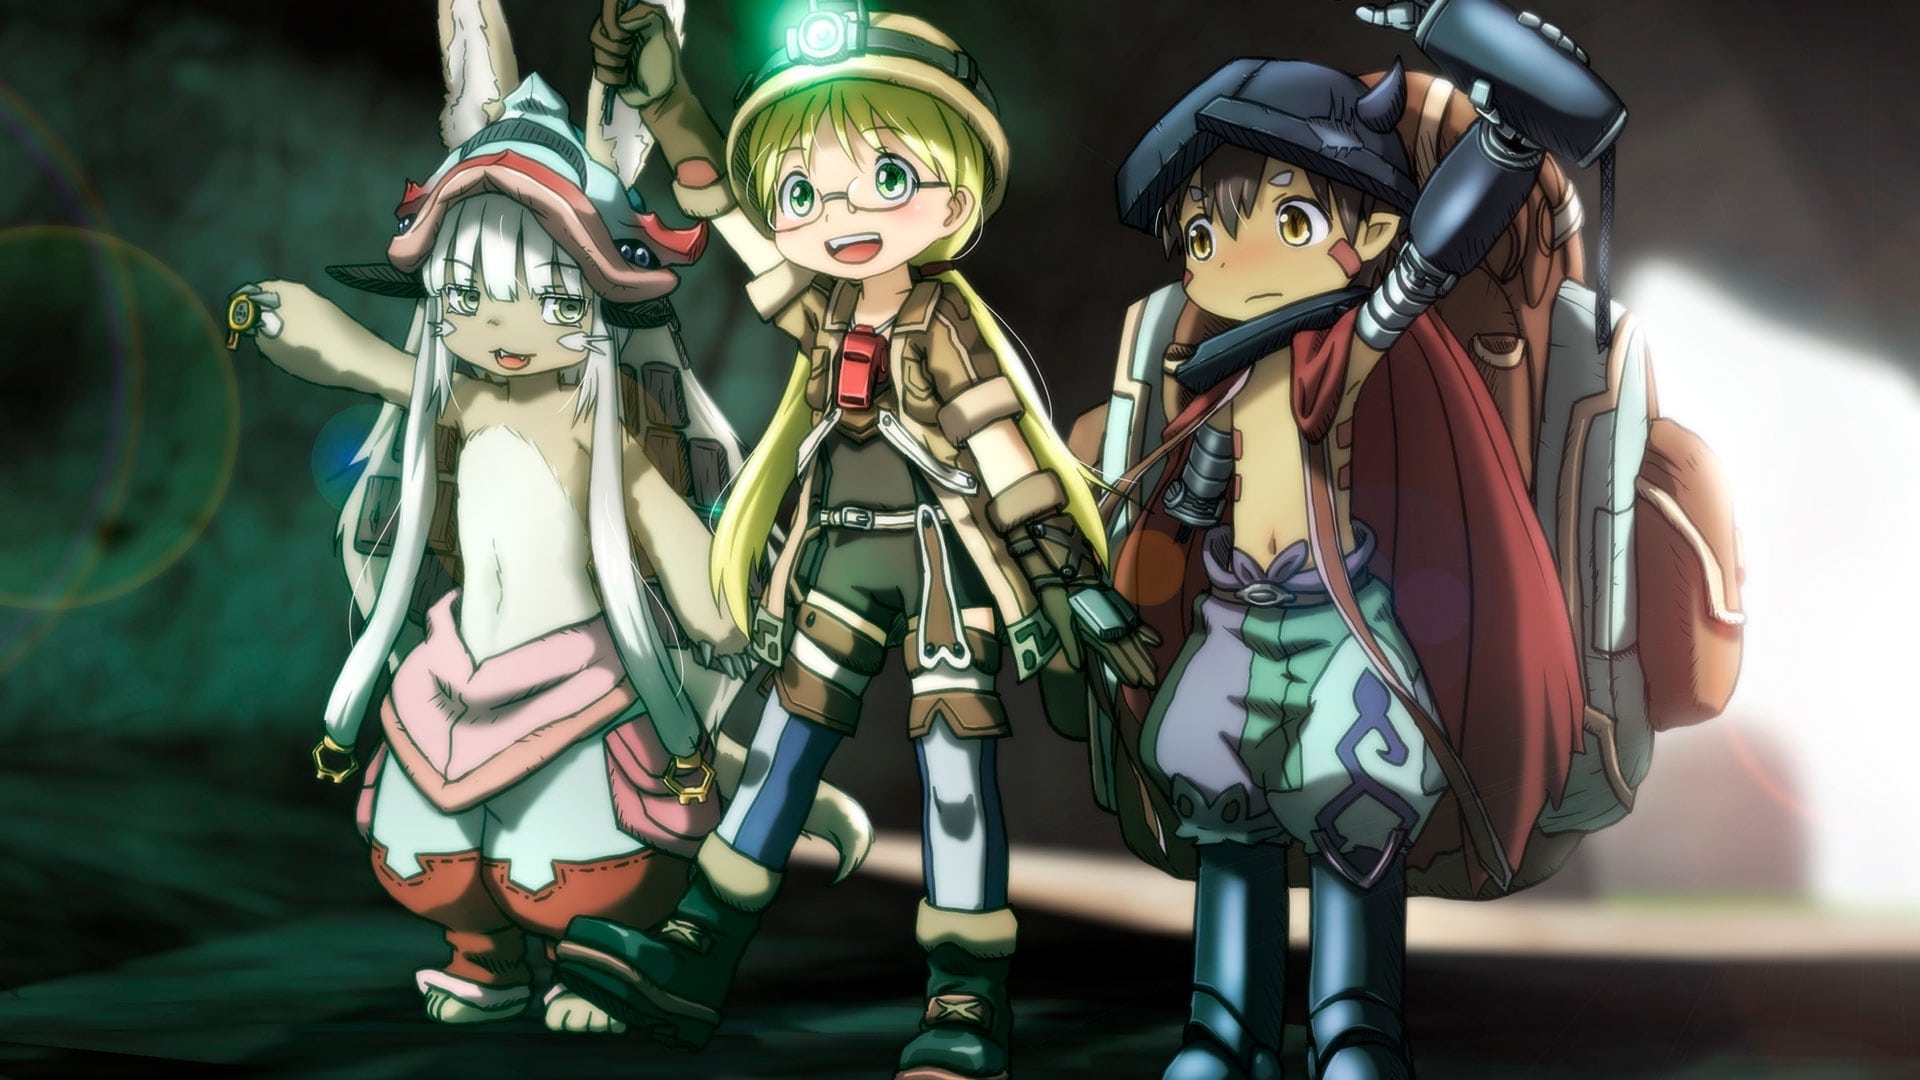 How To Watch Made In Abyss